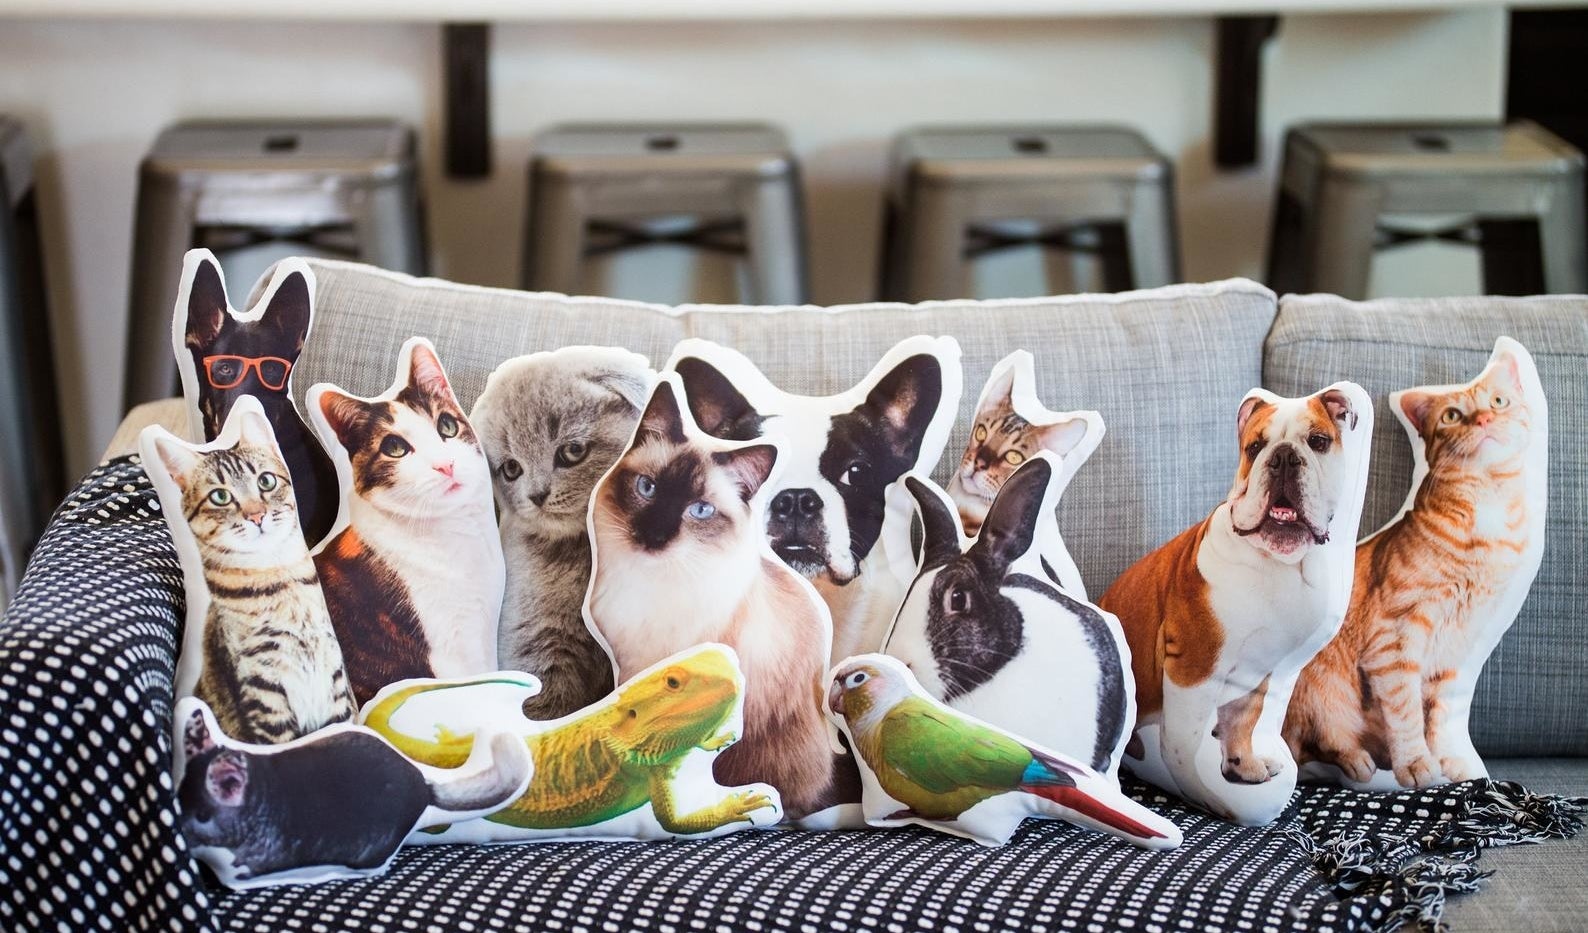 A collection of pillows that look like various pets (cats dogs, birds, etc.)